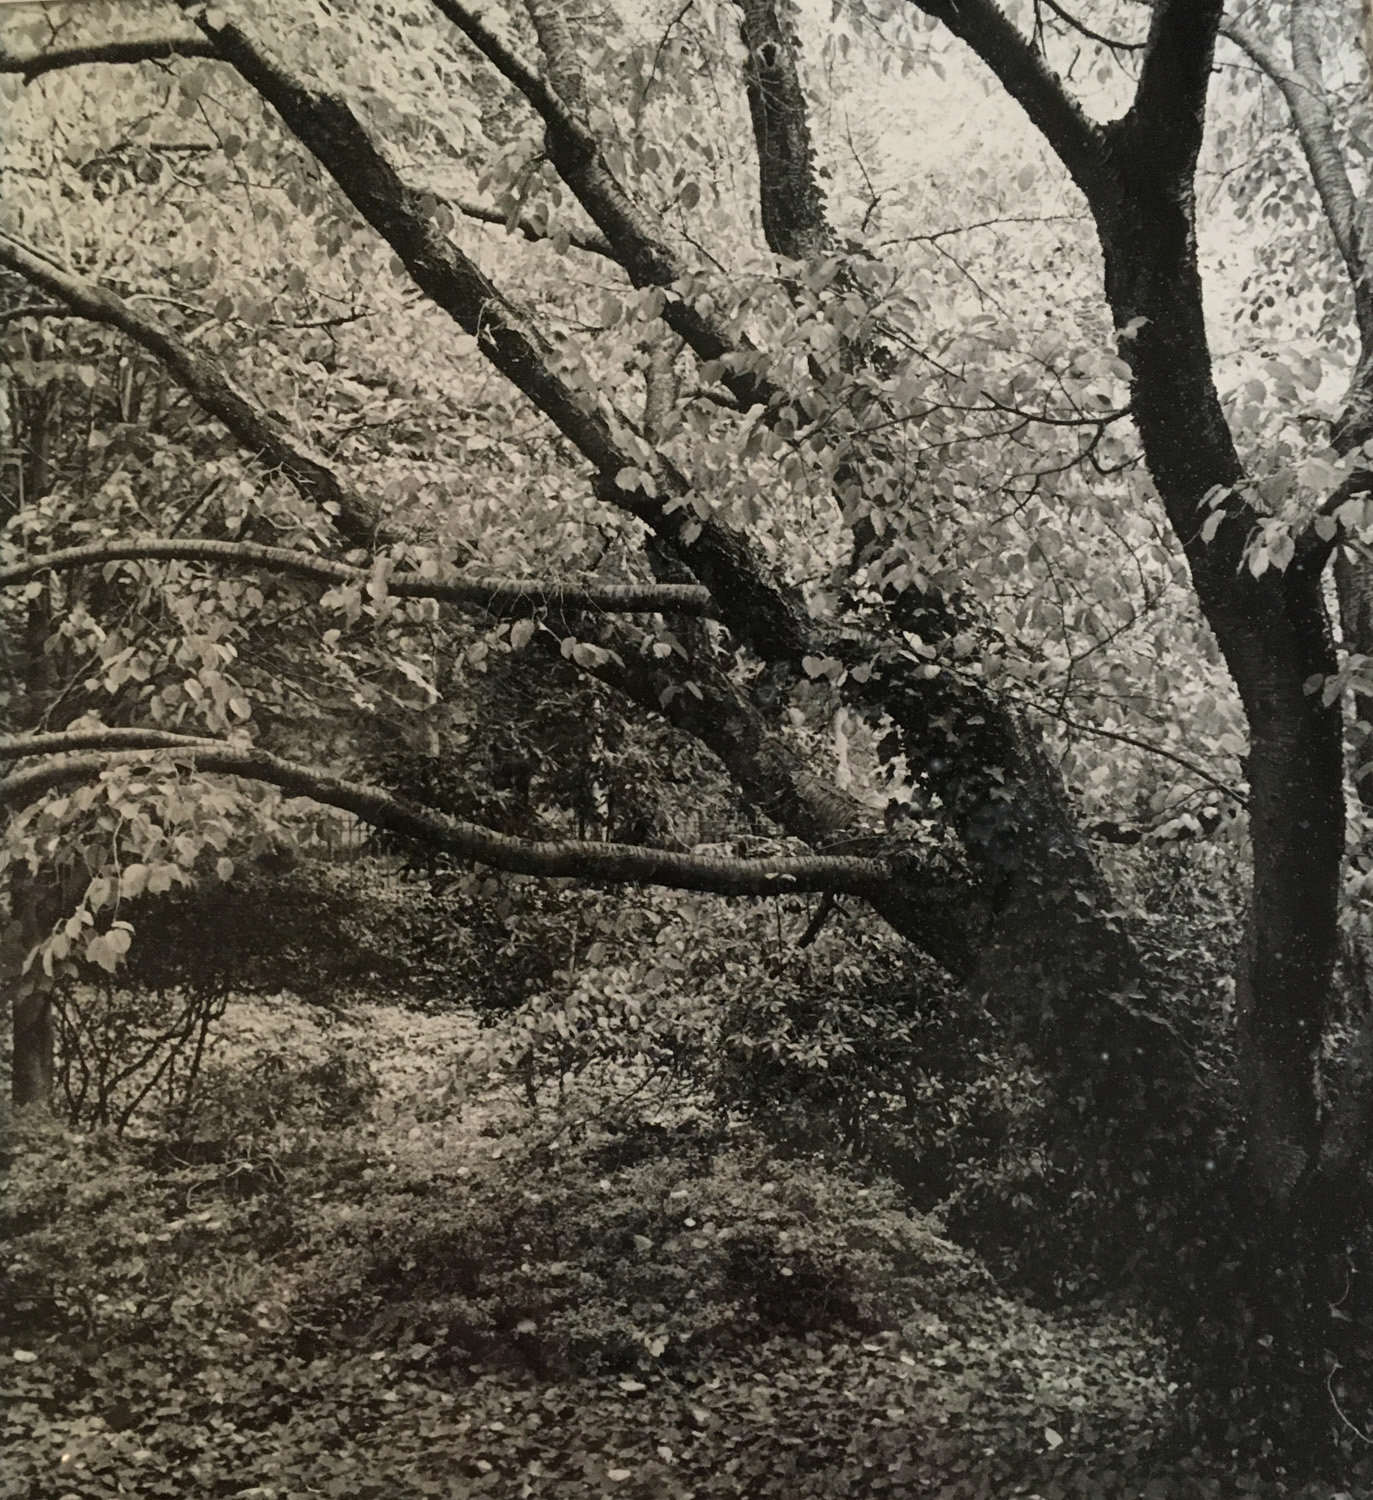 Mortimer Frank, a Toscanini scholar, was also an avid photographer. The above piece was featured in a gallery on 86th Street. Frank died March 30, age 87.